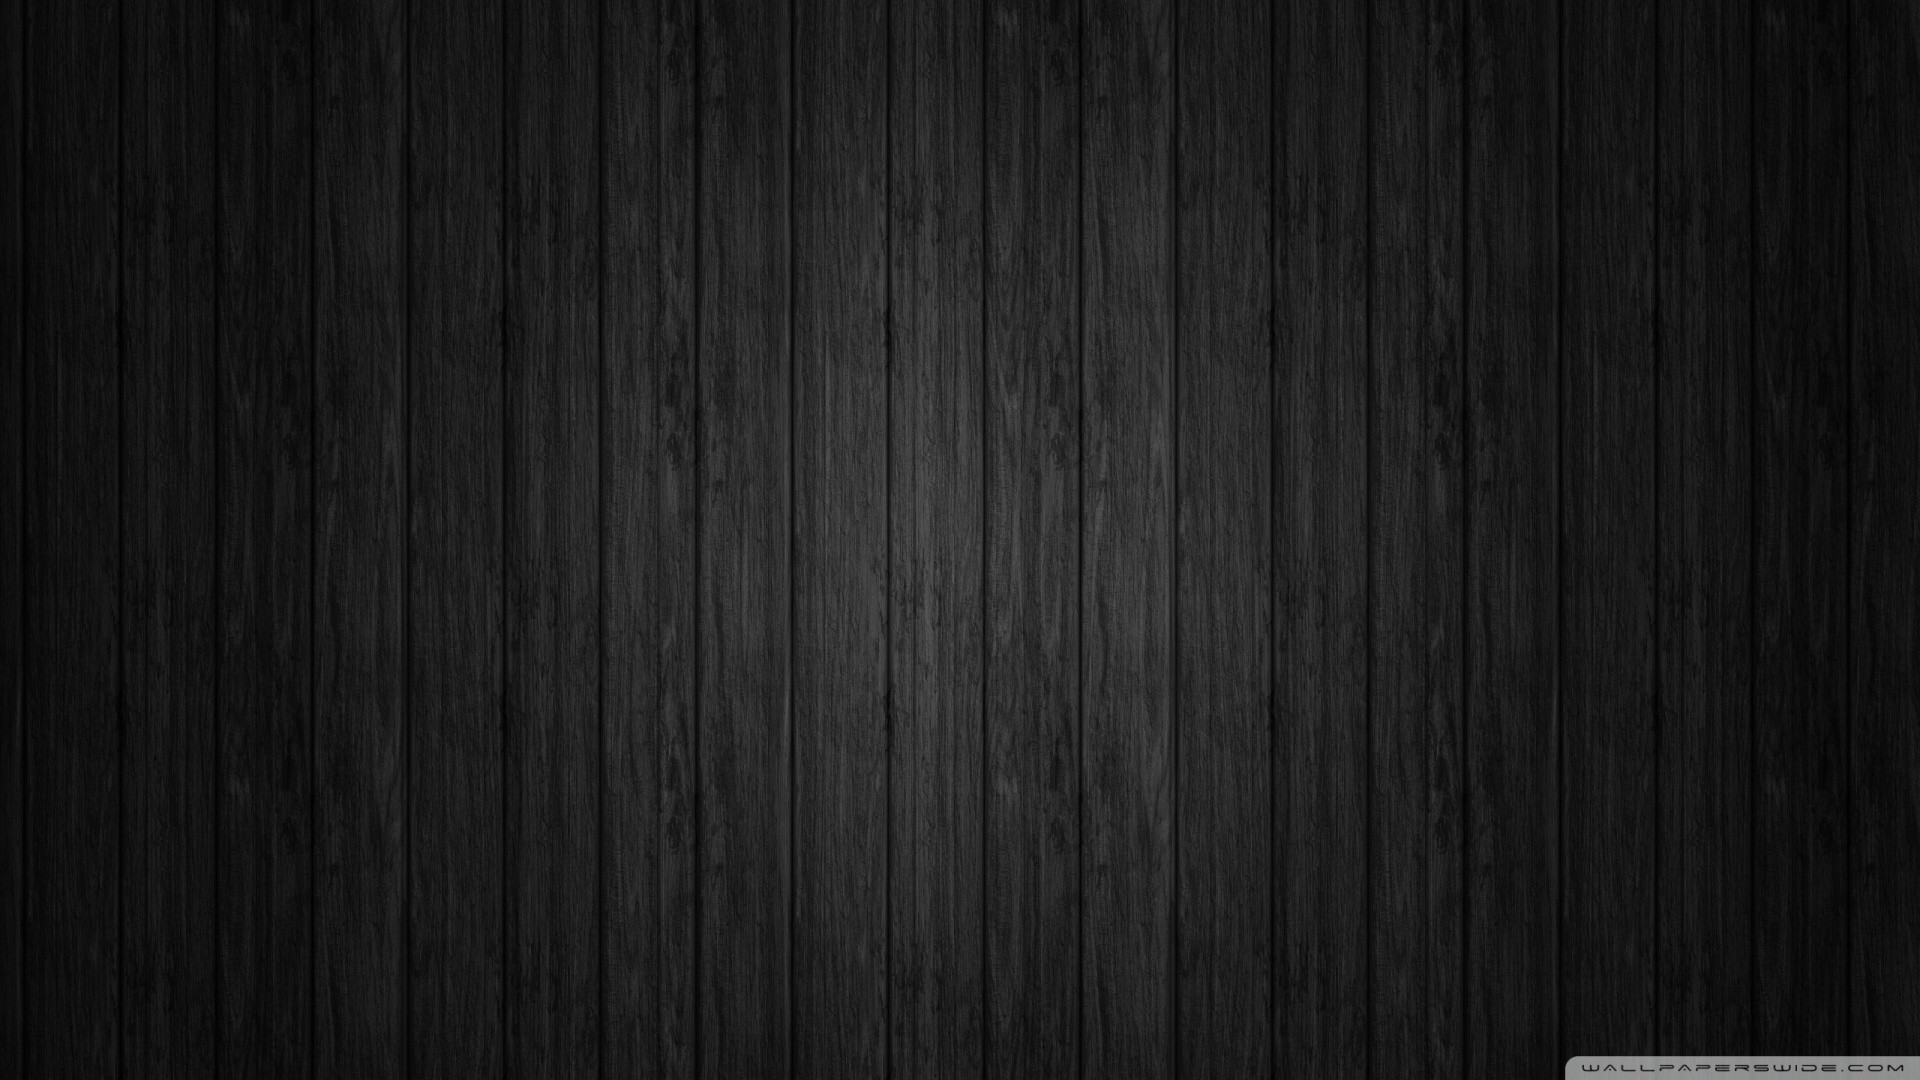 1920x1080 Grey Background Wallpaper | HD Wallpapers | Pinterest | Dark grey wallpaper,  Wallpaper and Dark